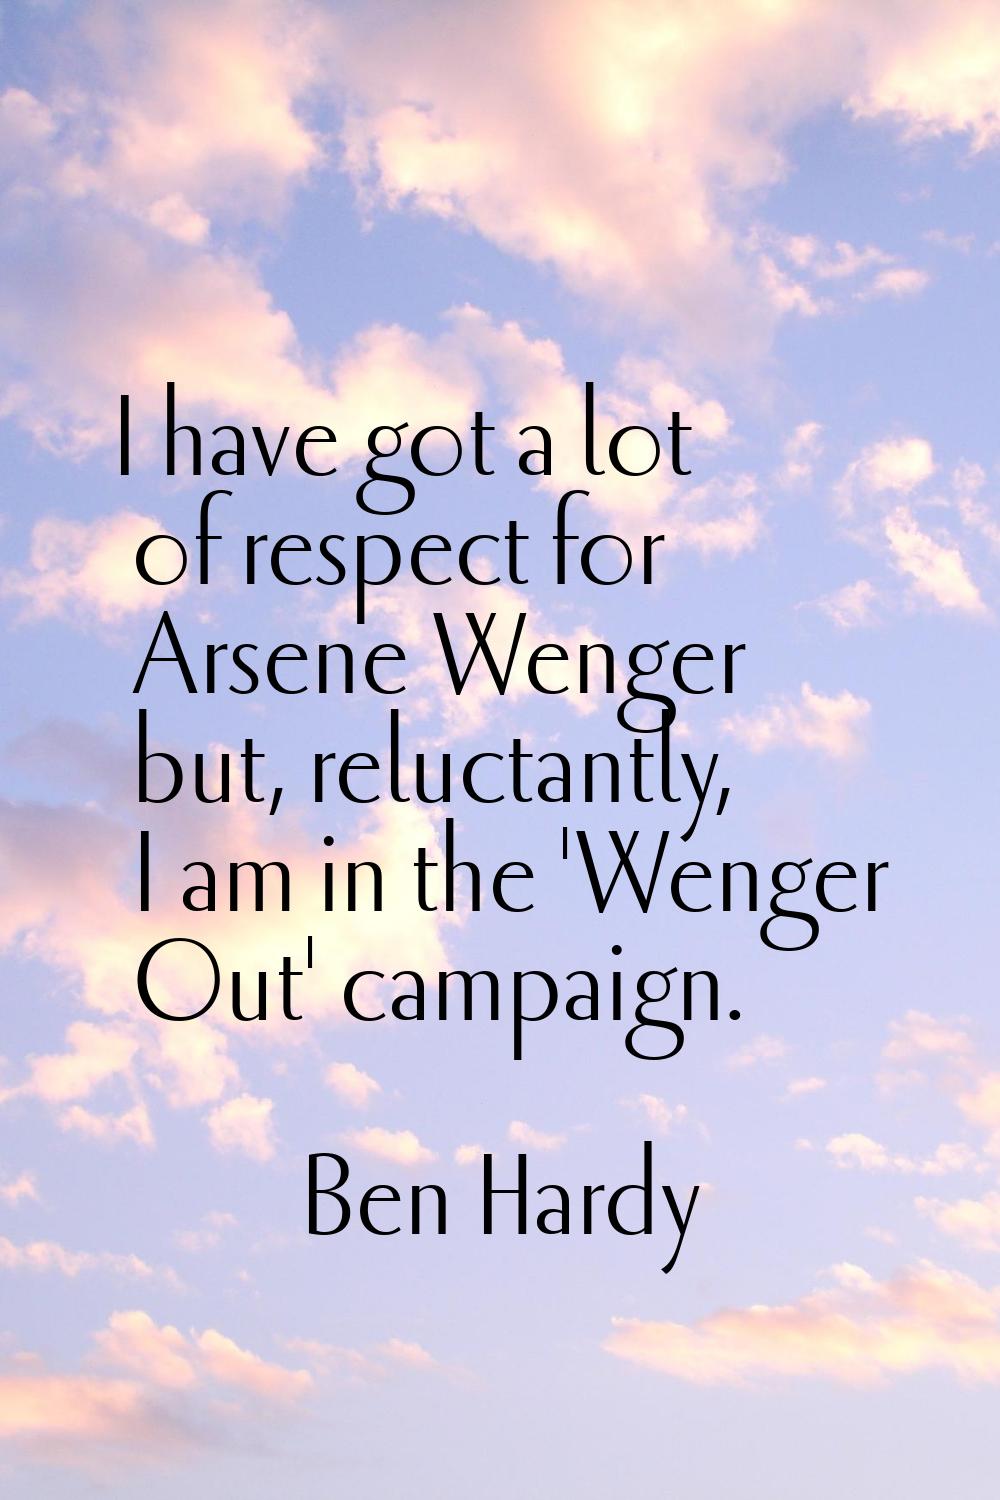 I have got a lot of respect for Arsene Wenger but, reluctantly, I am in the 'Wenger Out' campaign.